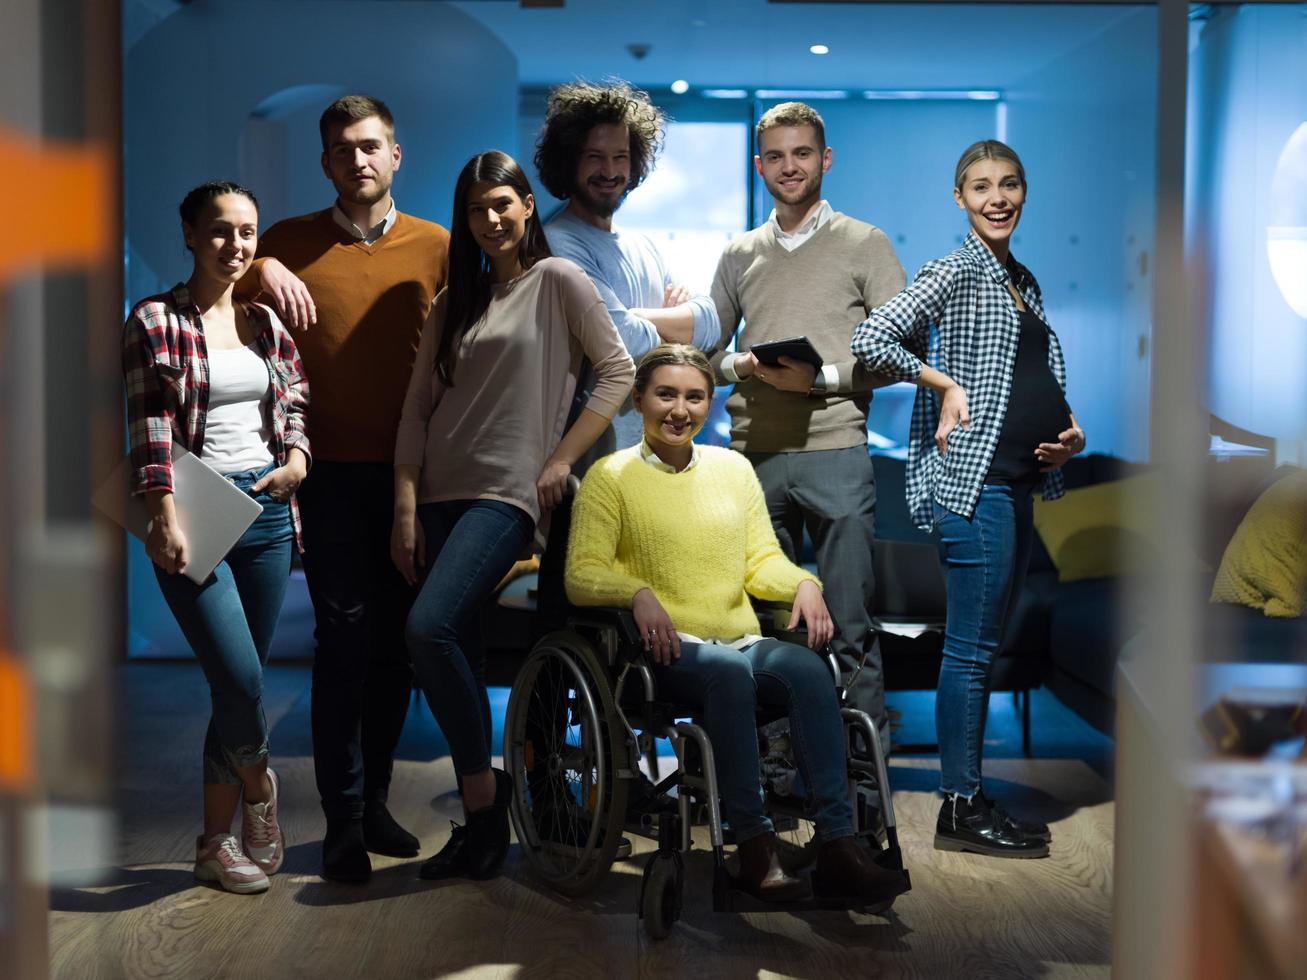 Disabled businesswoman in a wheelchair at the office with coworkers team photo